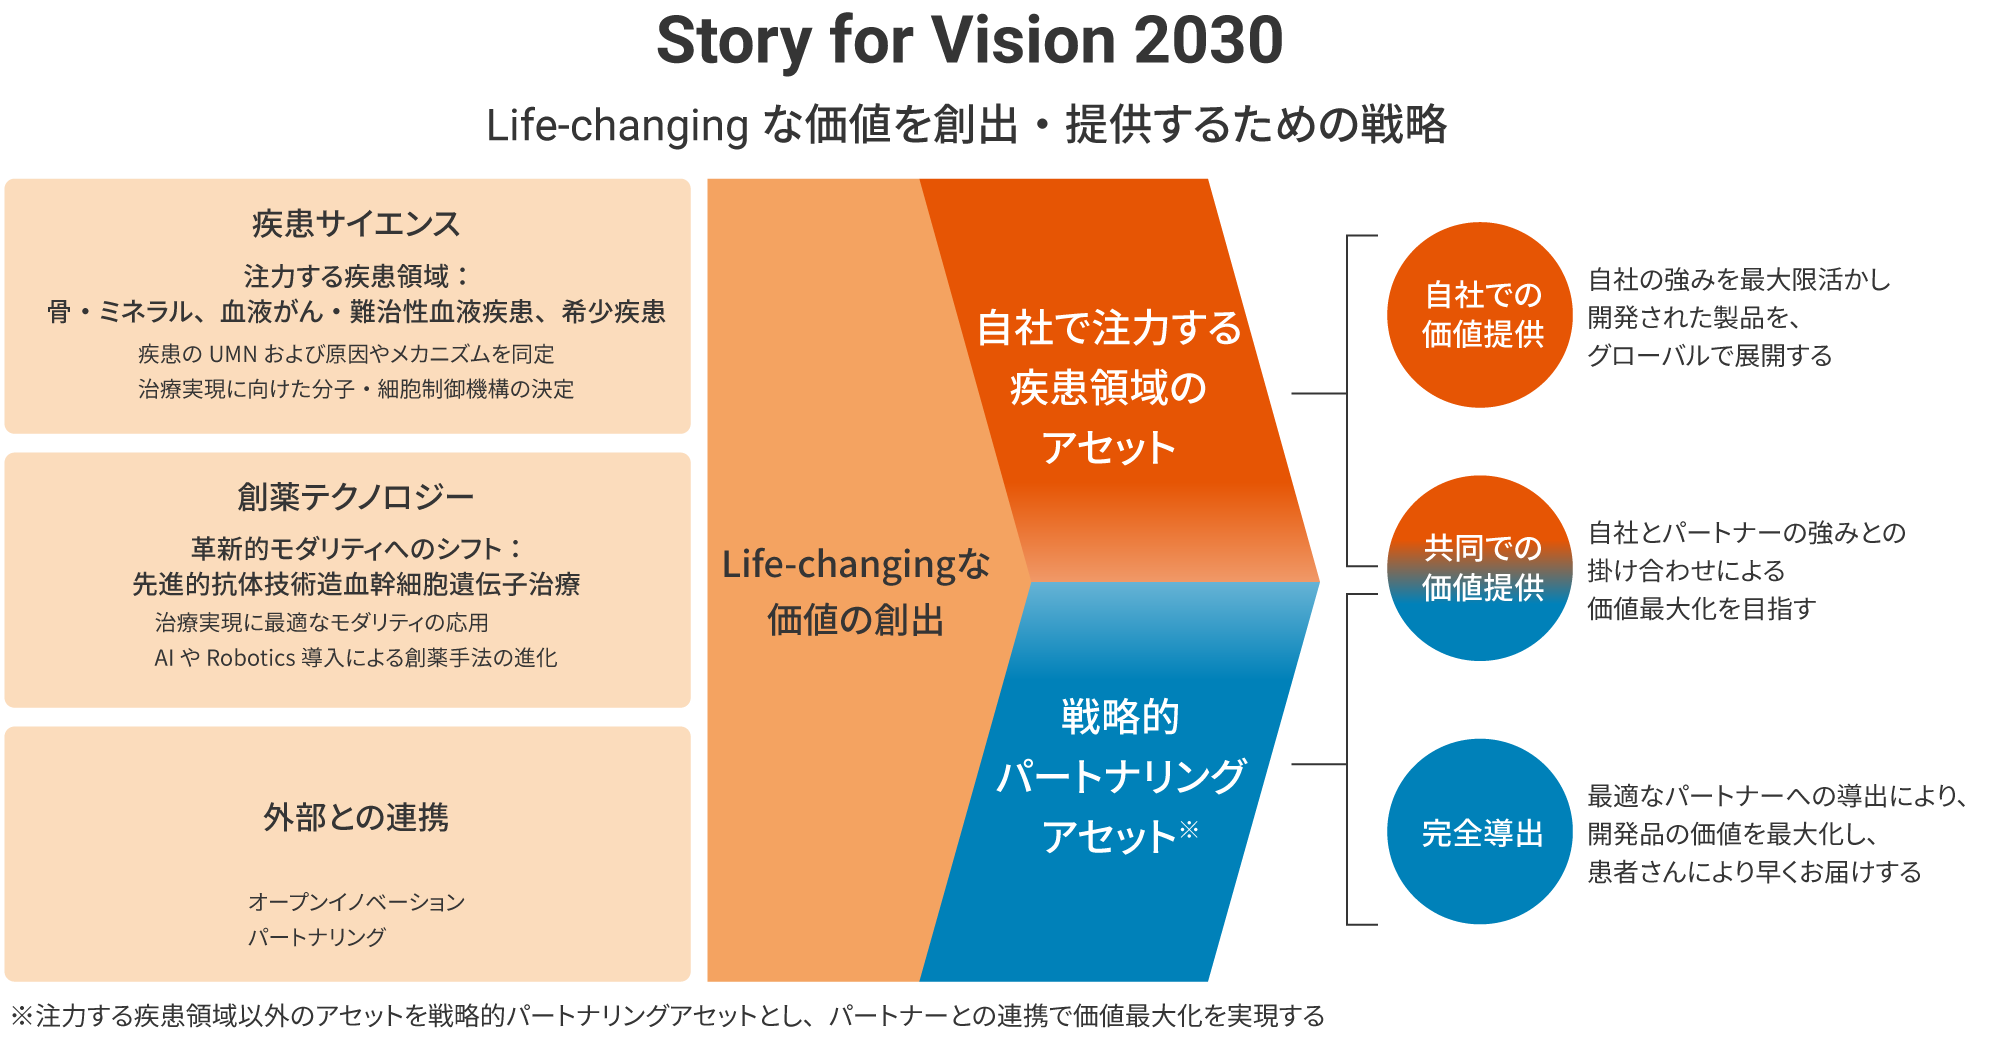 Story for Vision 2030 Life-changingな価値を創出・提供するための戦略。疾患サイエンス、創薬テクノロジー、外部との連携を行う。自社で注力する疾患領域のアセット、戦略的パートナリングアセットを活用し、Life-changingな価値の創出を行う。